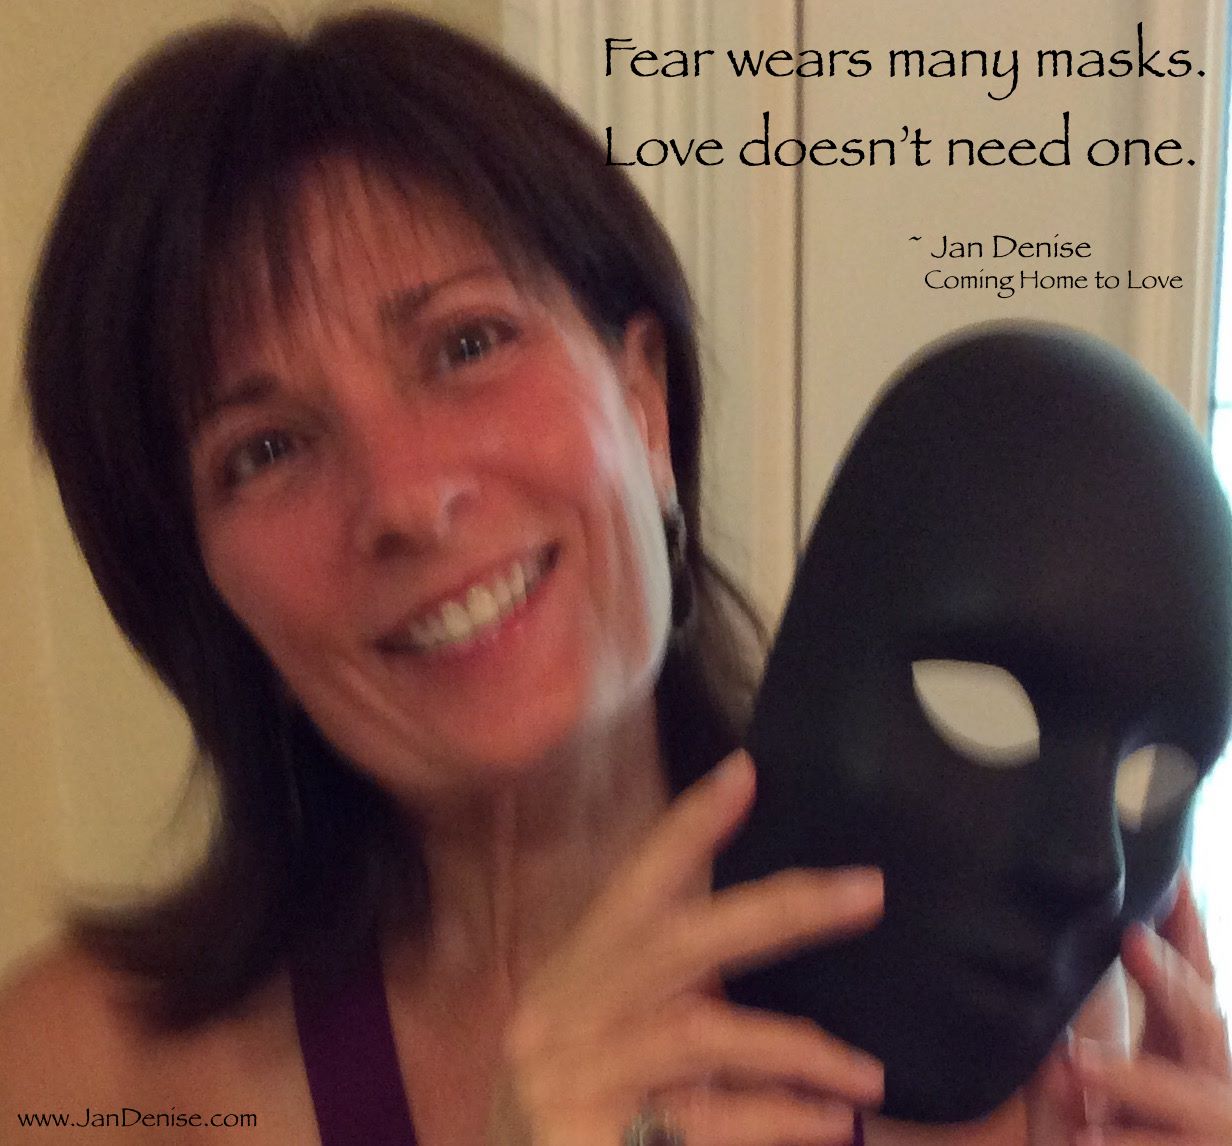 Does your fear wear a mask?